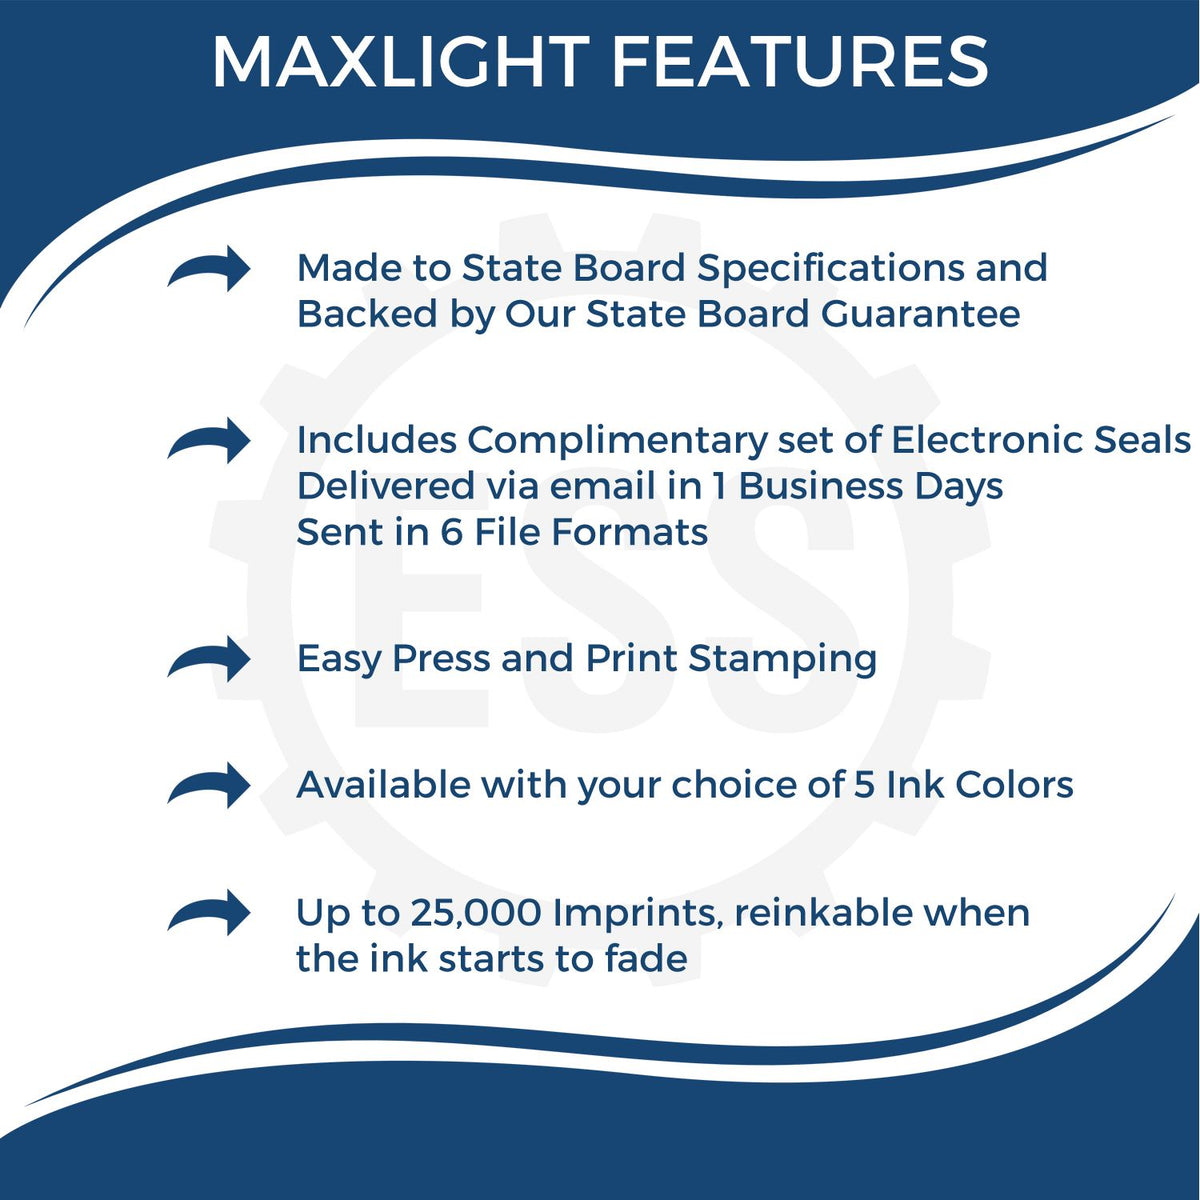 A picture of an infographic highlighting the selling points for the Premium MaxLight Pre-Inked Wisconsin Geology Stamp